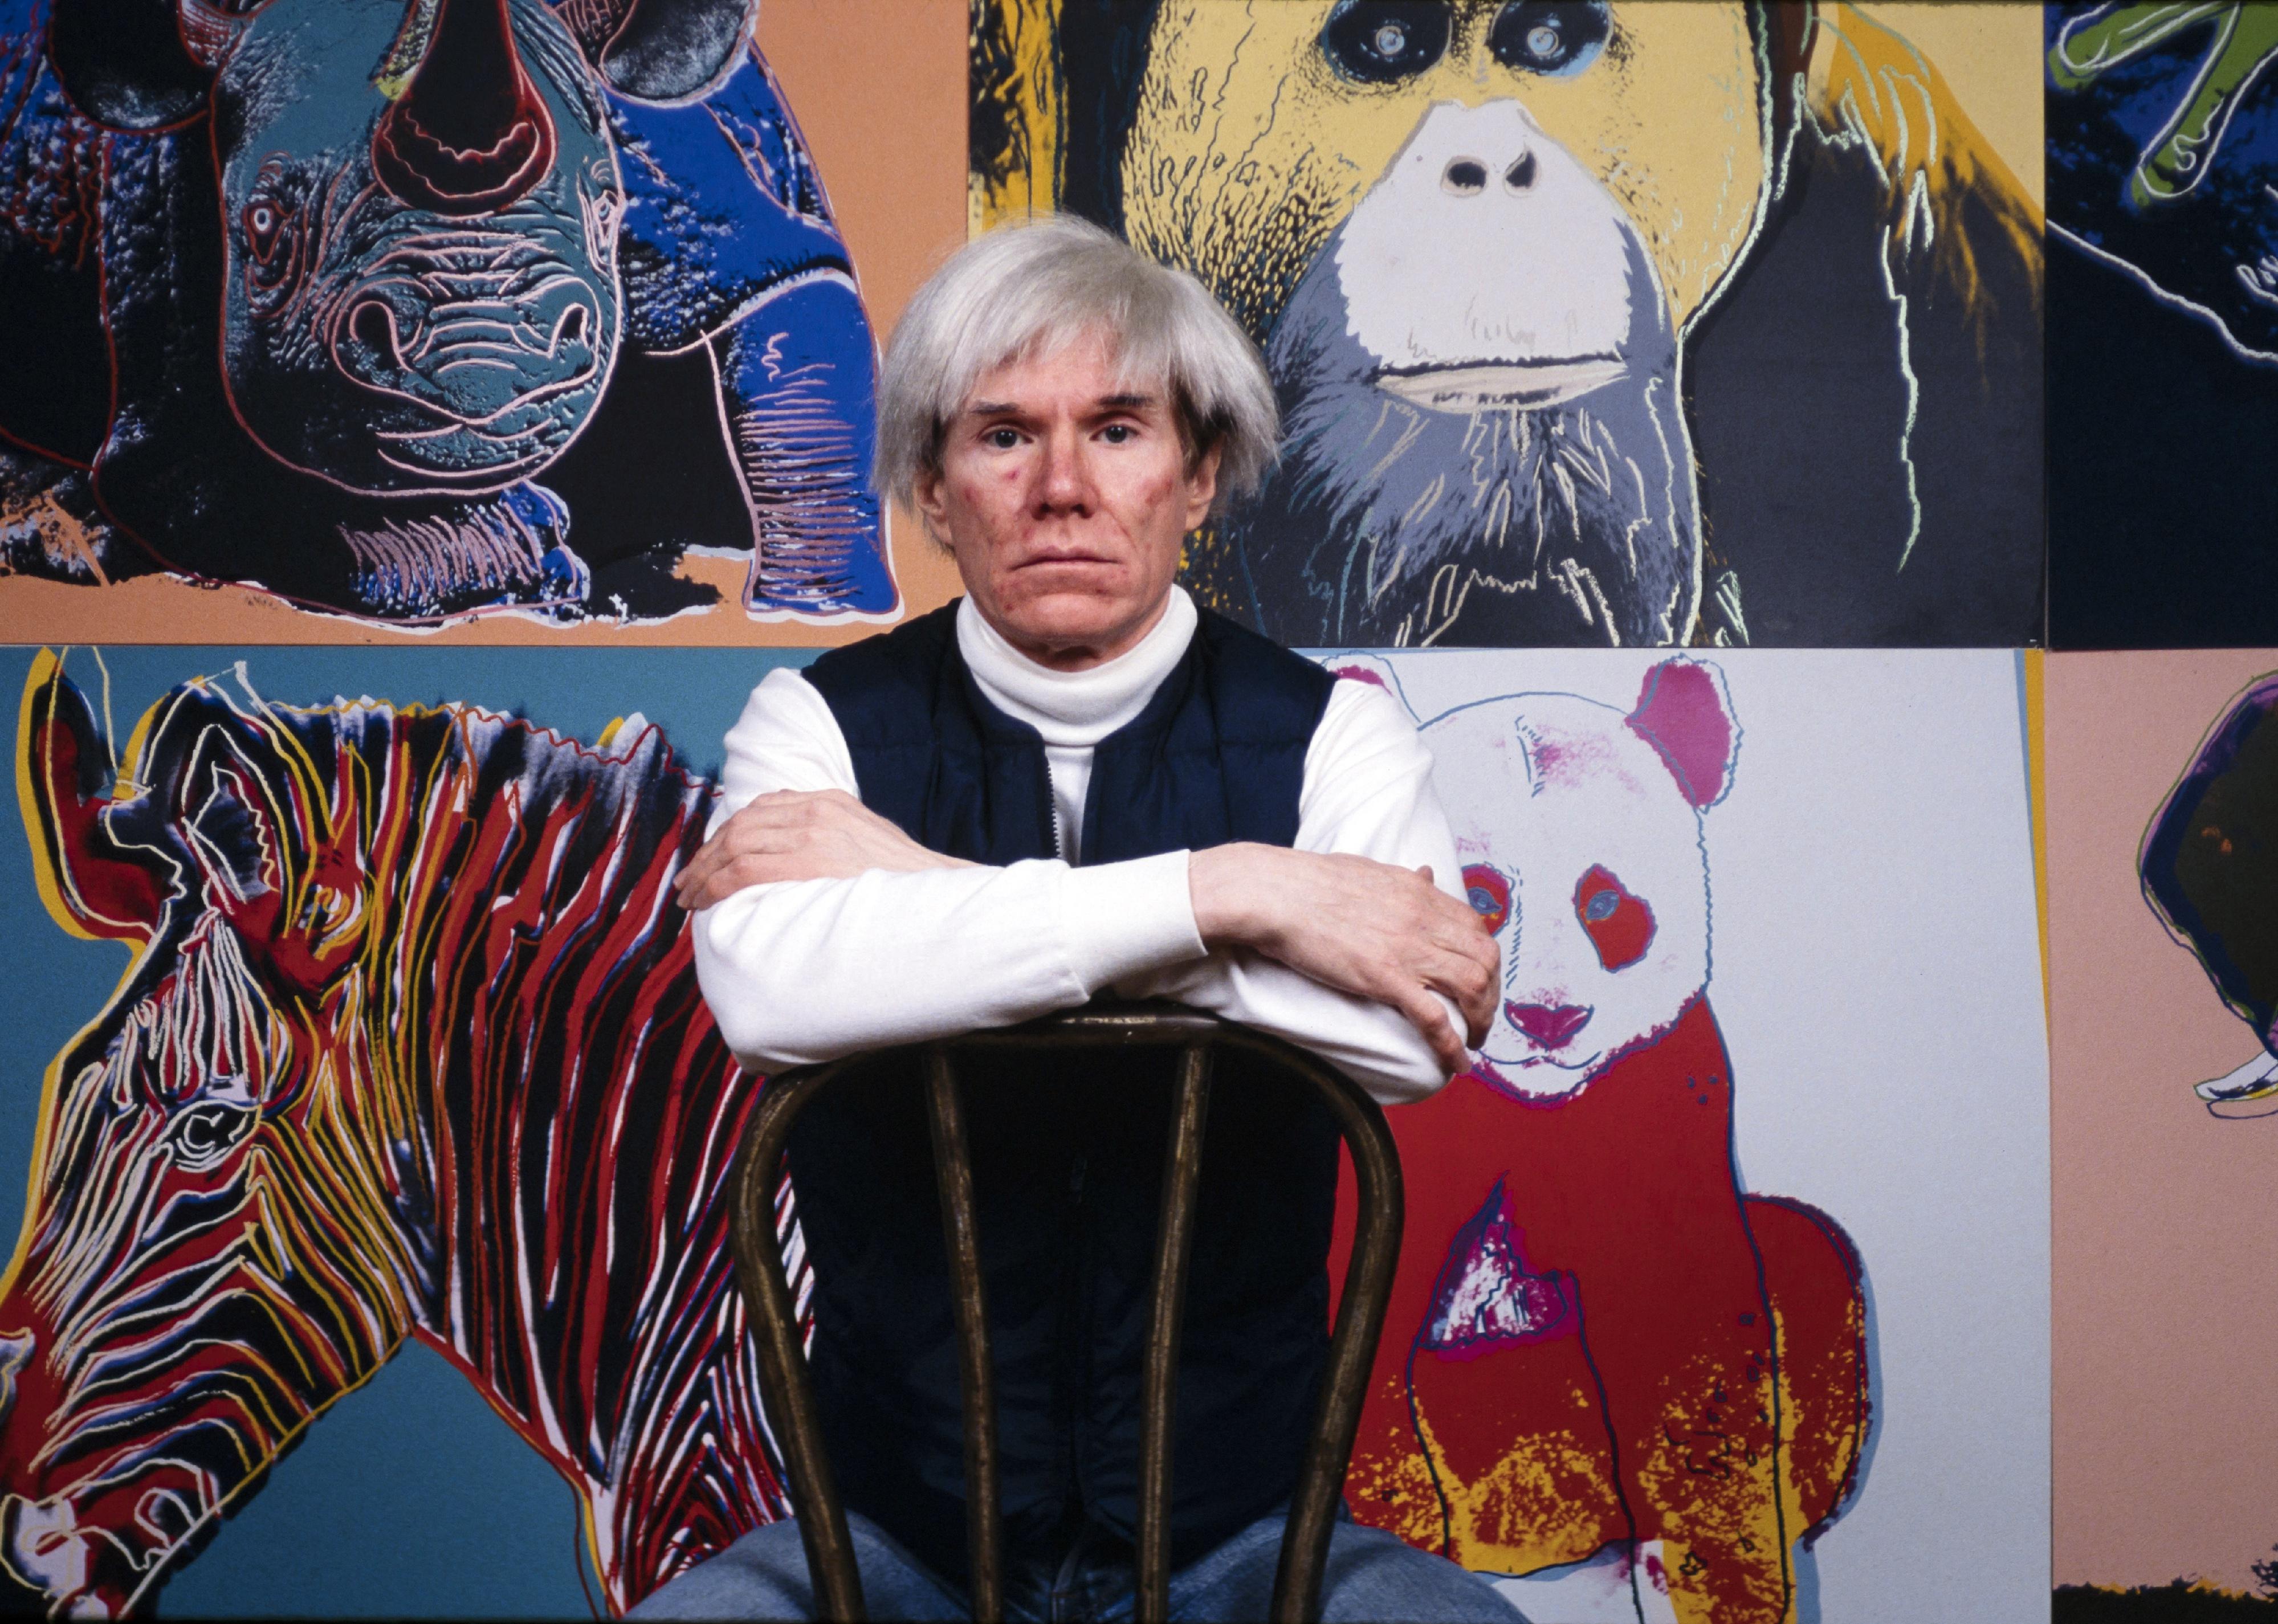  Andy Warhol sits in front of several paintings in his 'Endangered Species' at his studio.